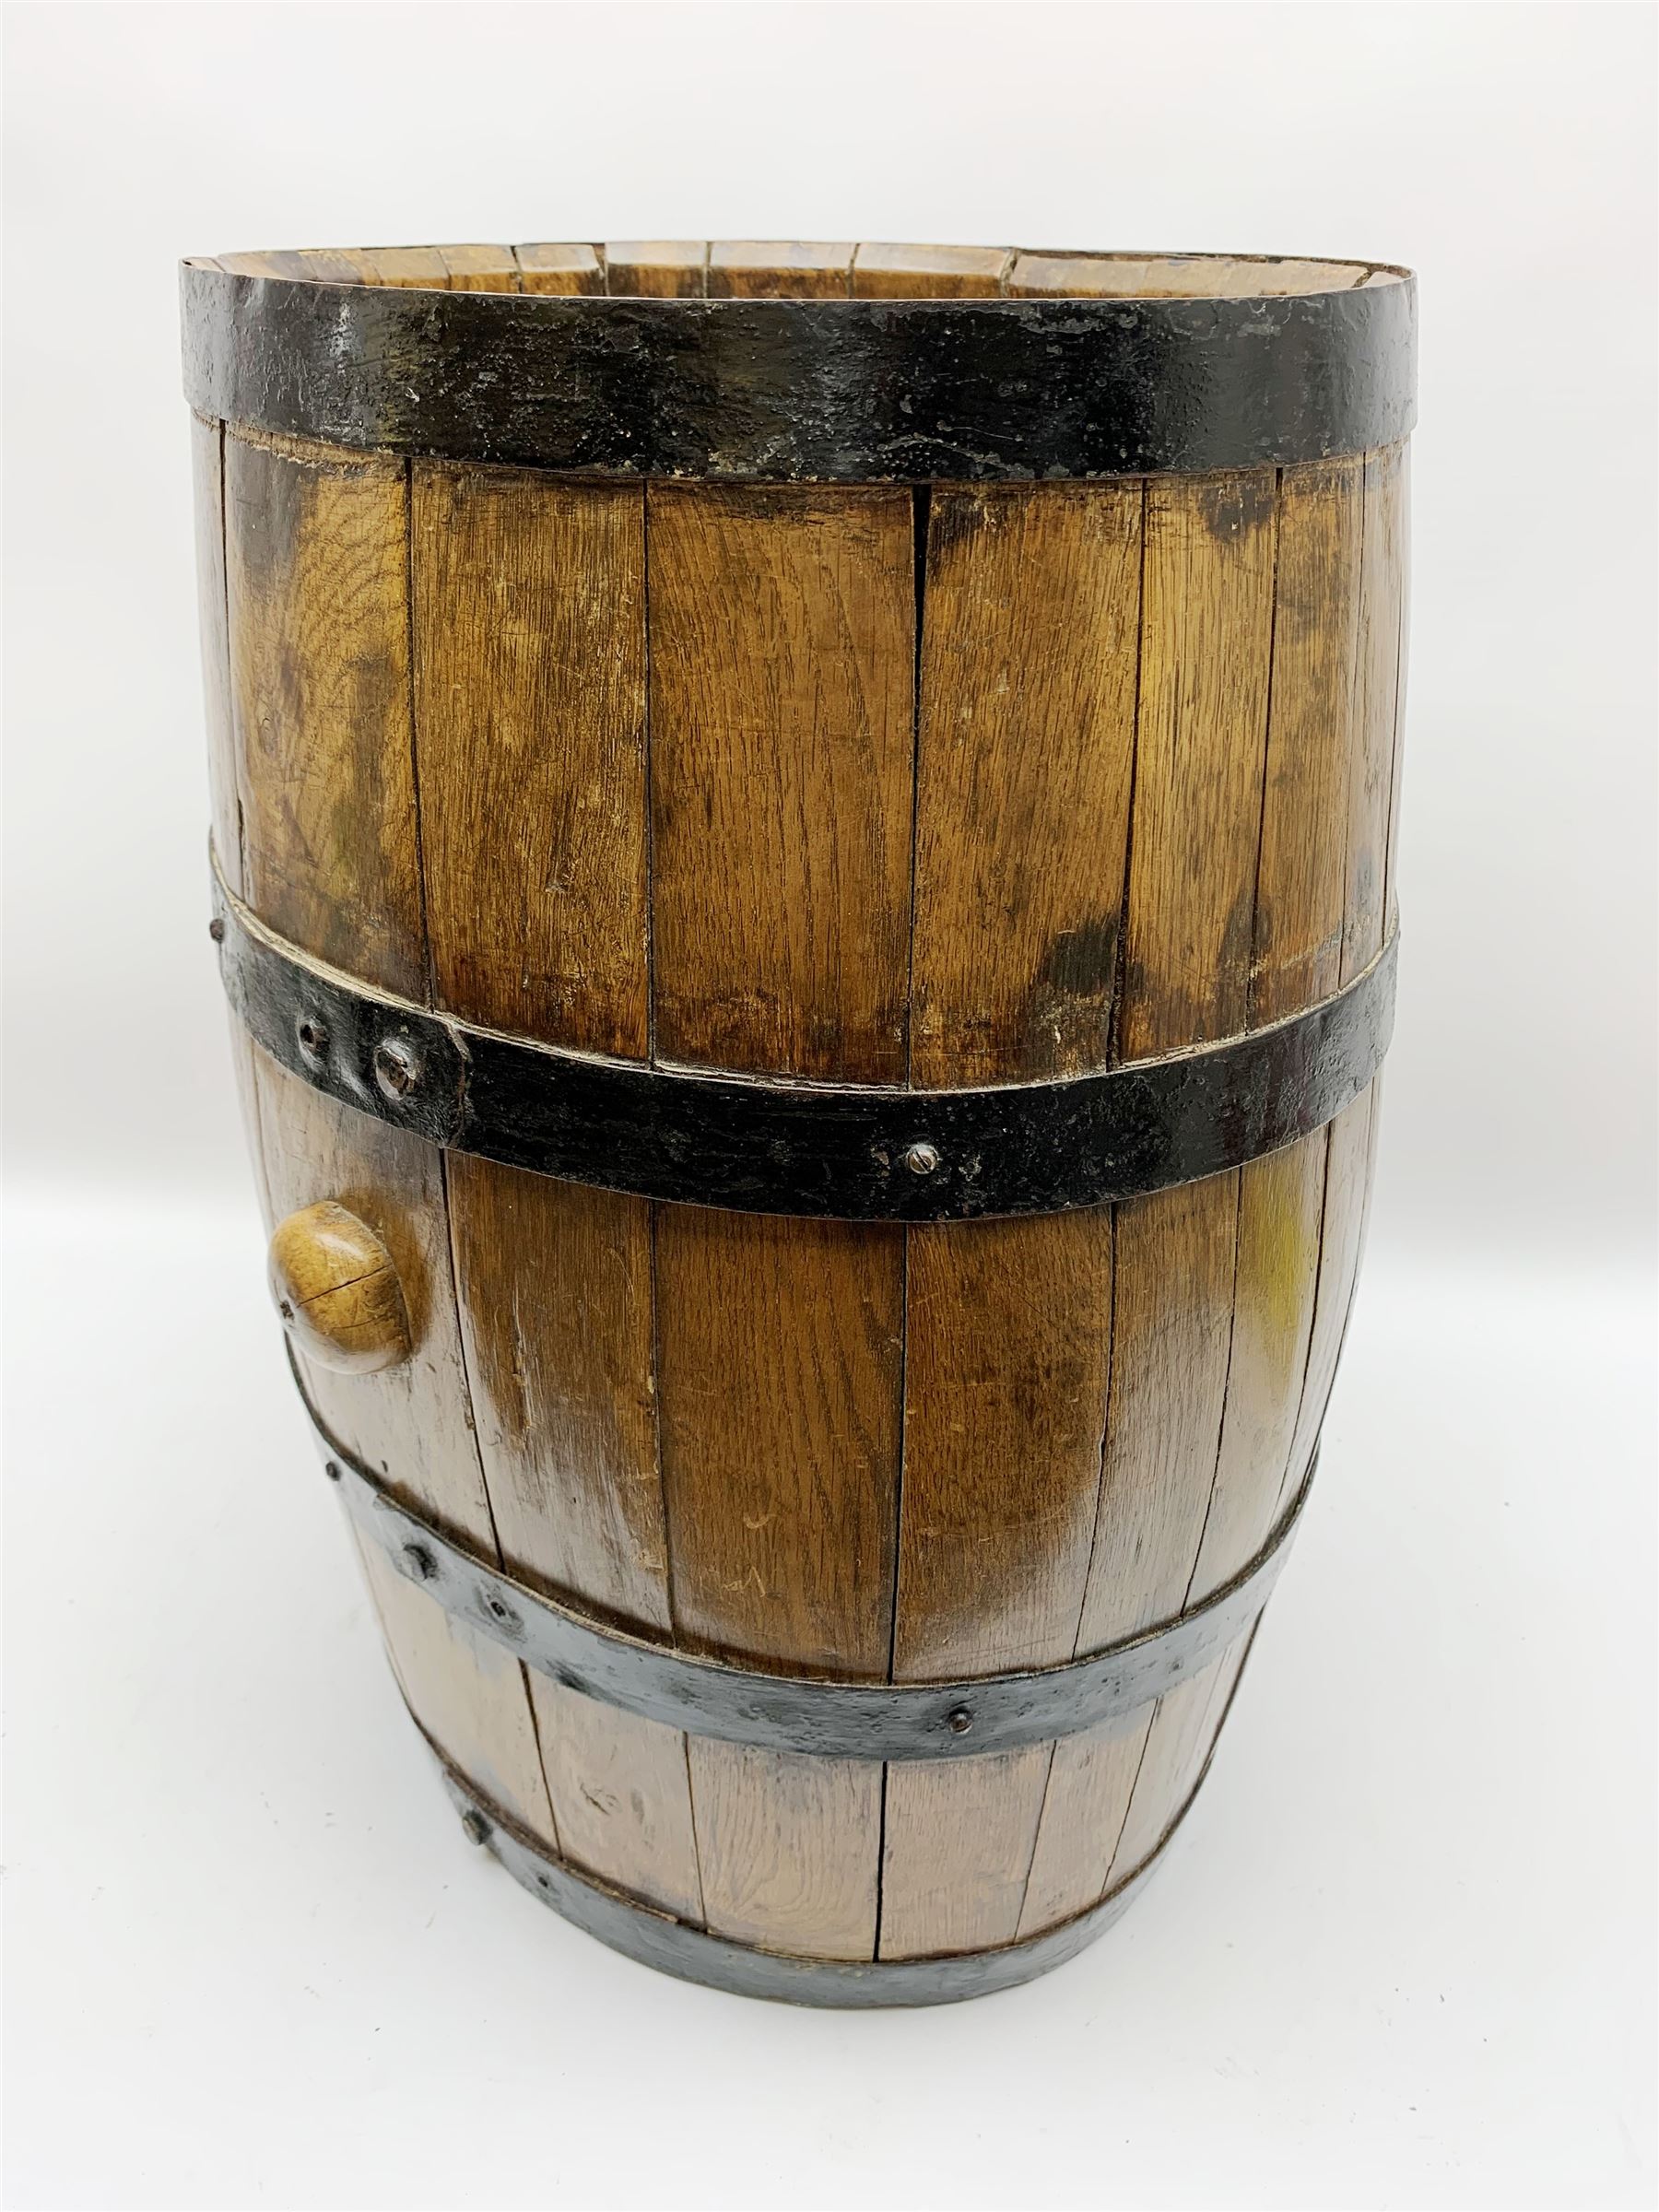 19th century oak and metal bound coopered barrel - Image 3 of 5